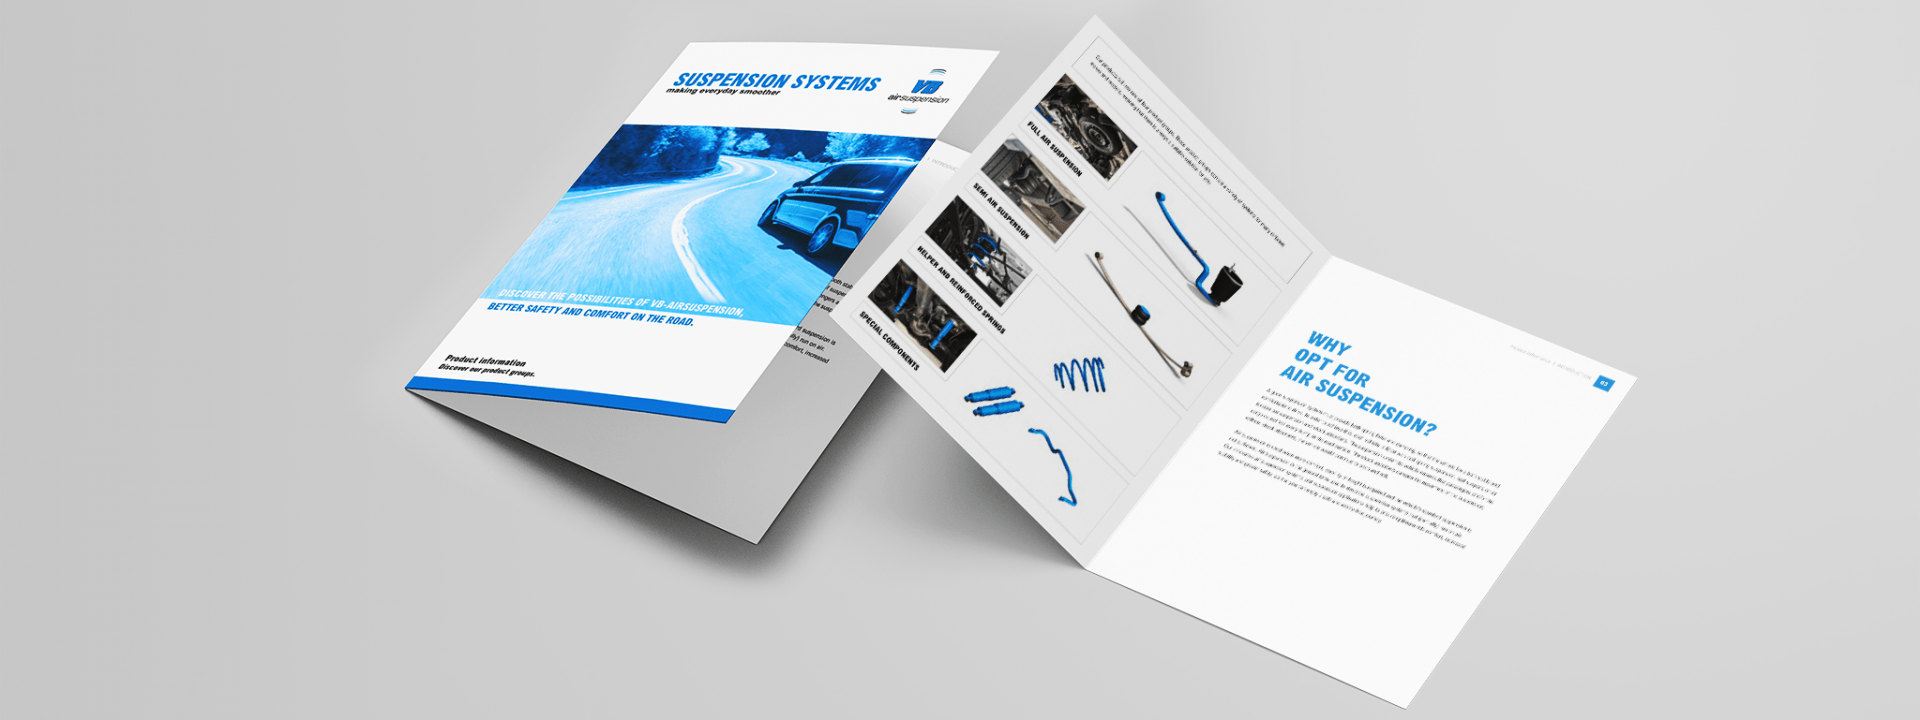 product information brochure